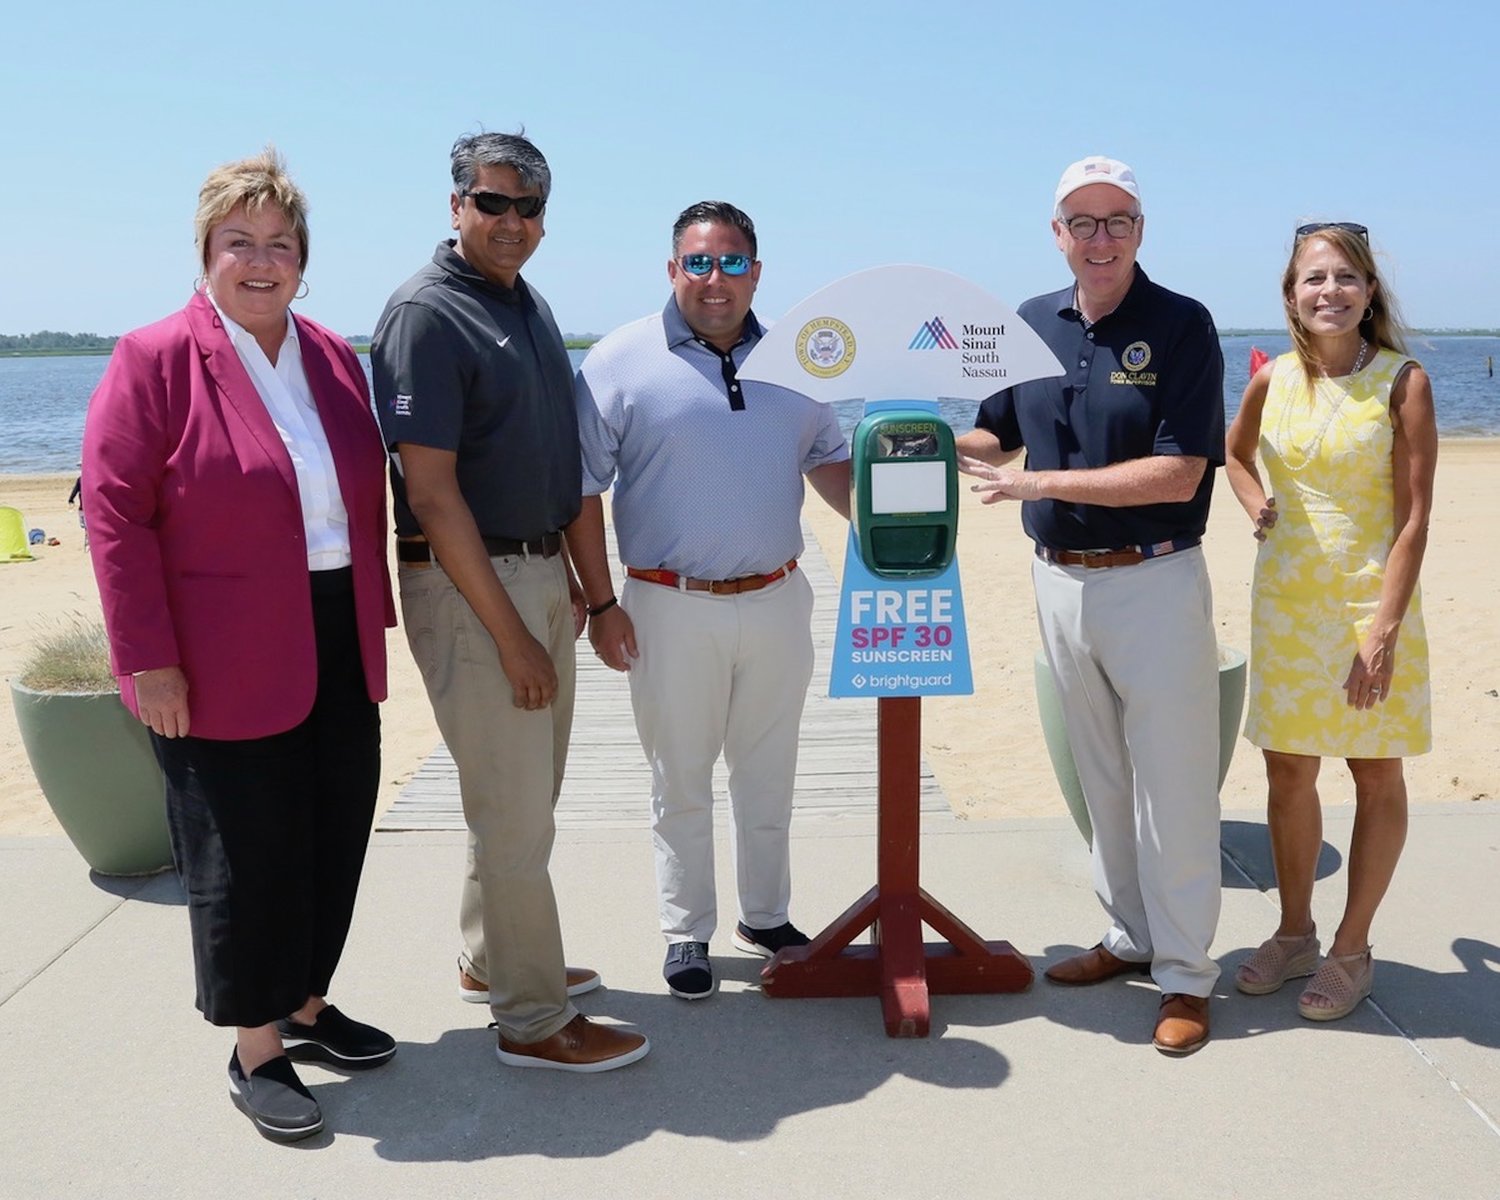 Town of Hempstead officials and Mount Sinai South Nassau have partnered to provide sunscreen at town-operated beaches and pools. Taking part were, from left, Town Clerk Kate Murray, MSSN Chief Medical Officer Dr. Adhi Sharma, Councilman Anthony D’Esposito, Supervisor Don Clavin and Receiver of Taxes Jeanine Driscoll.